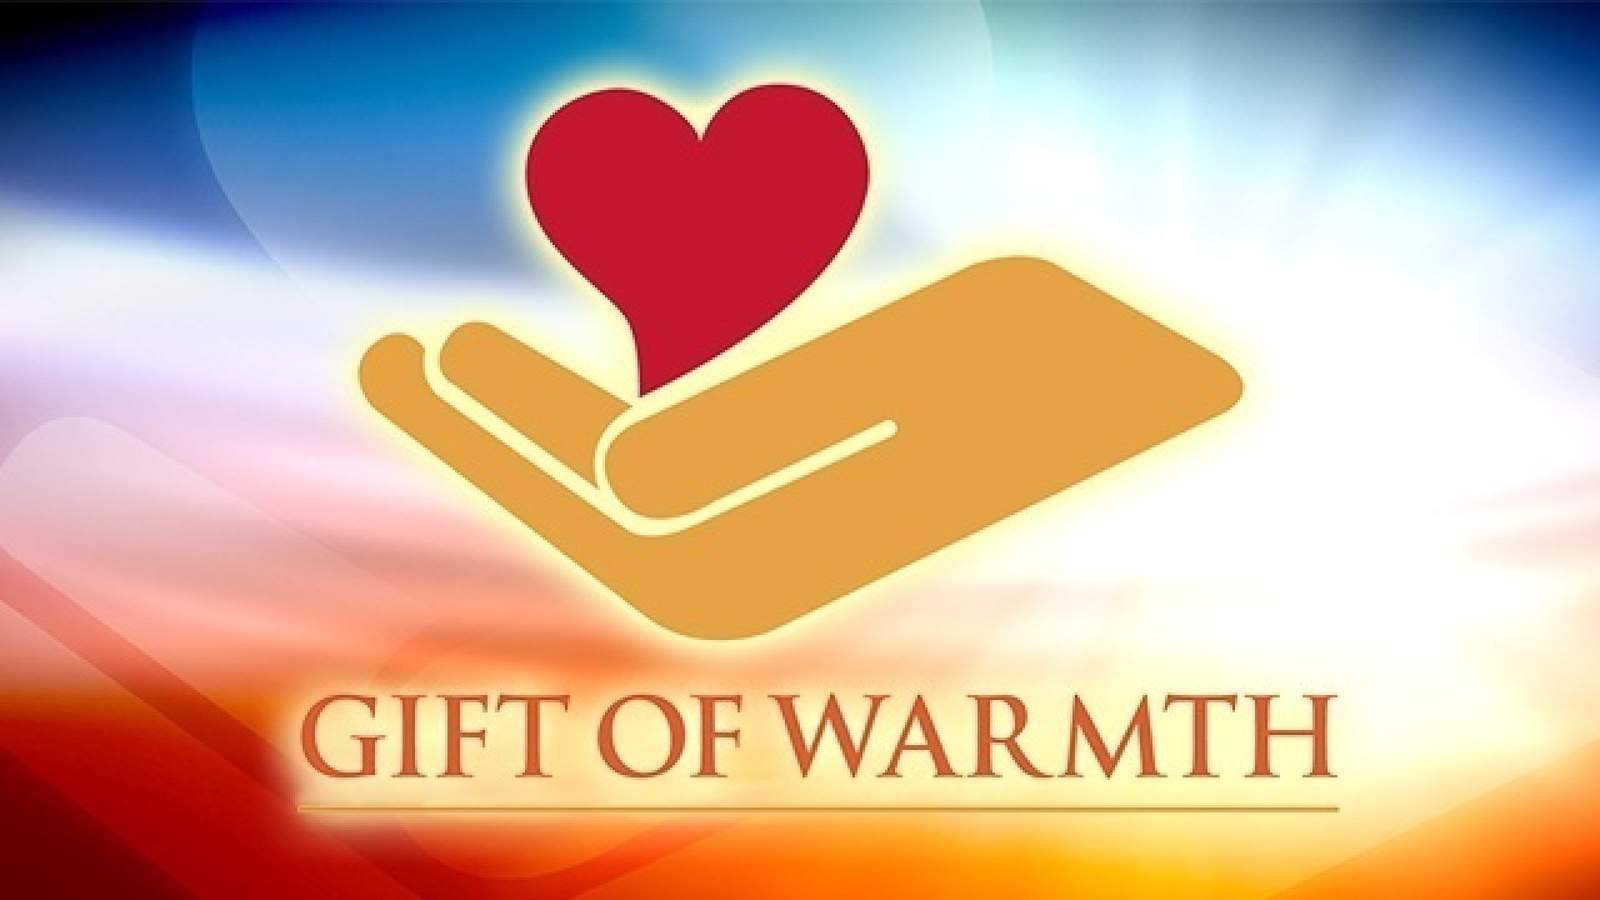 The Gift of Warmth: How to help families in need